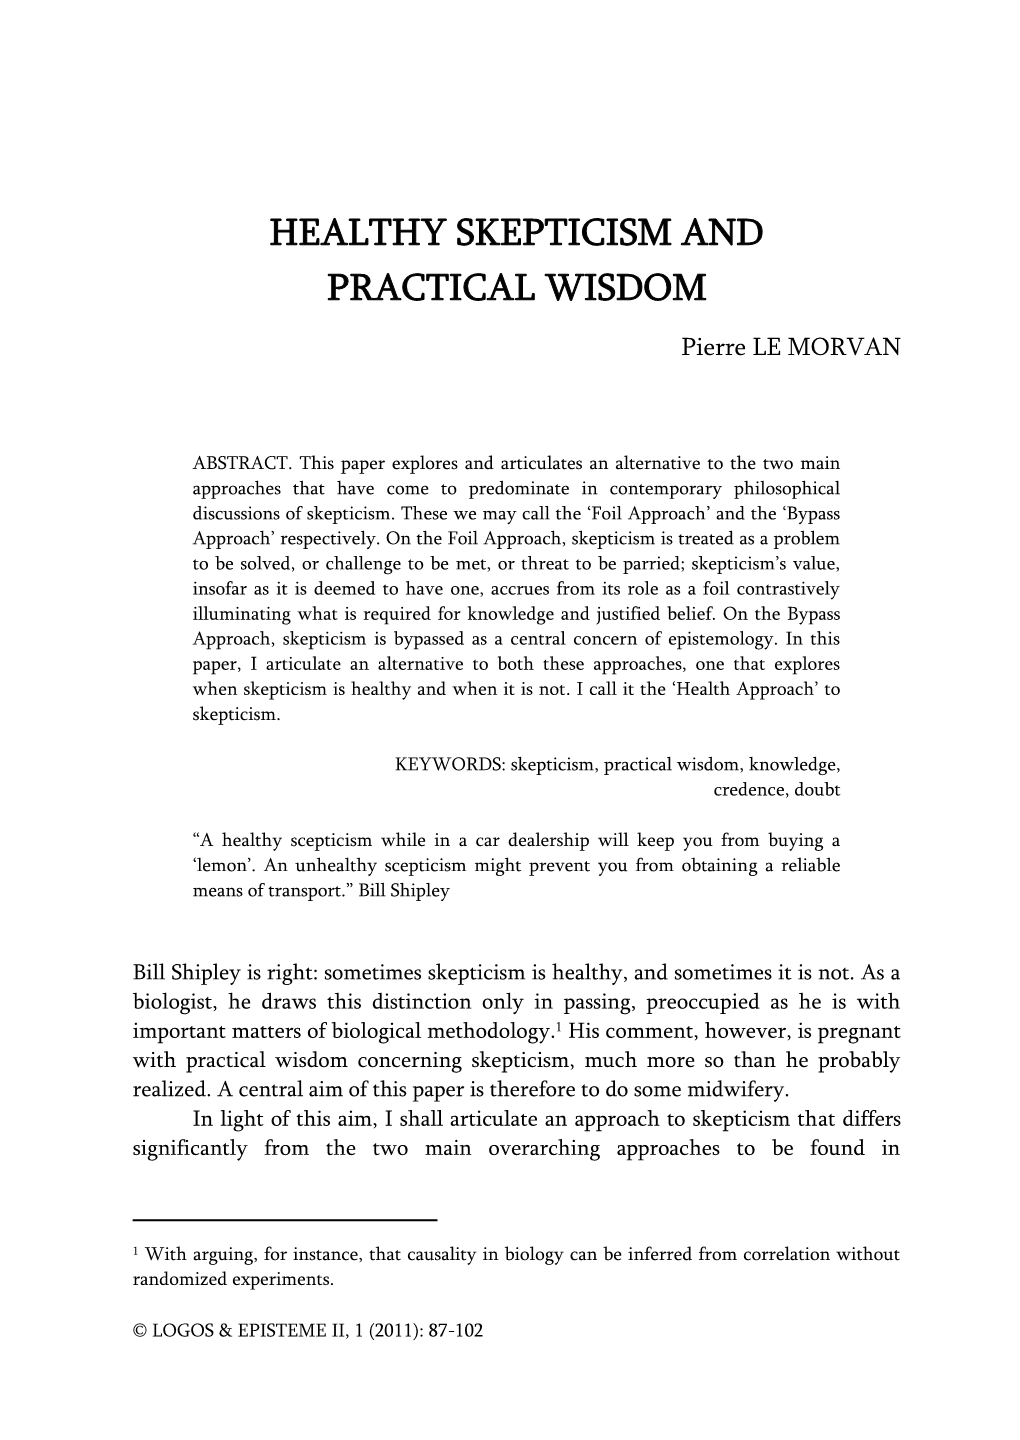 Healthy Skepticism and Practical Wisdom